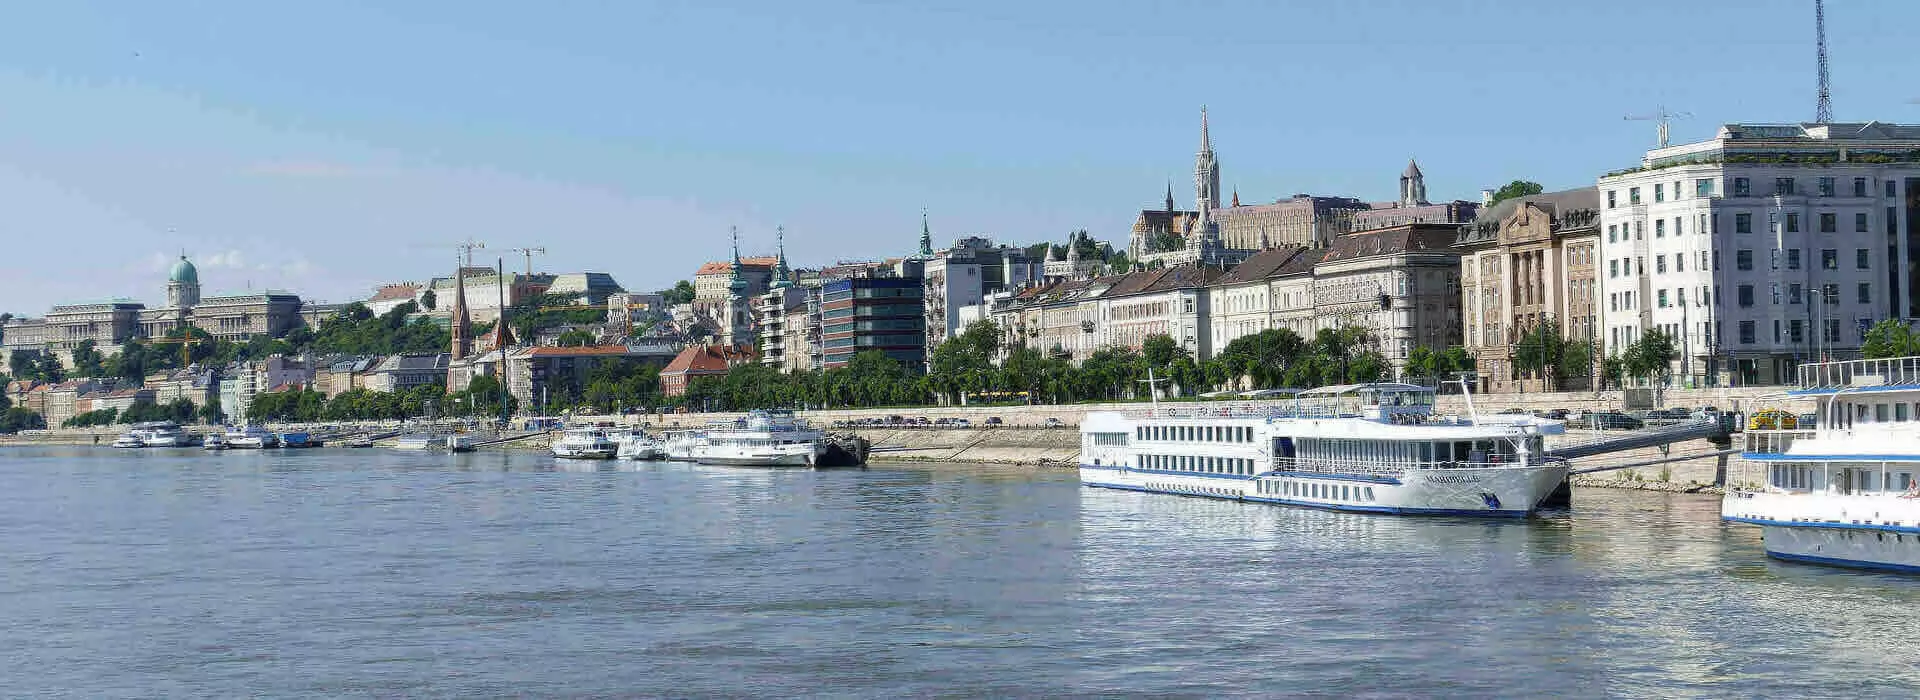 River Cruise Ship in Budapest, Hungary